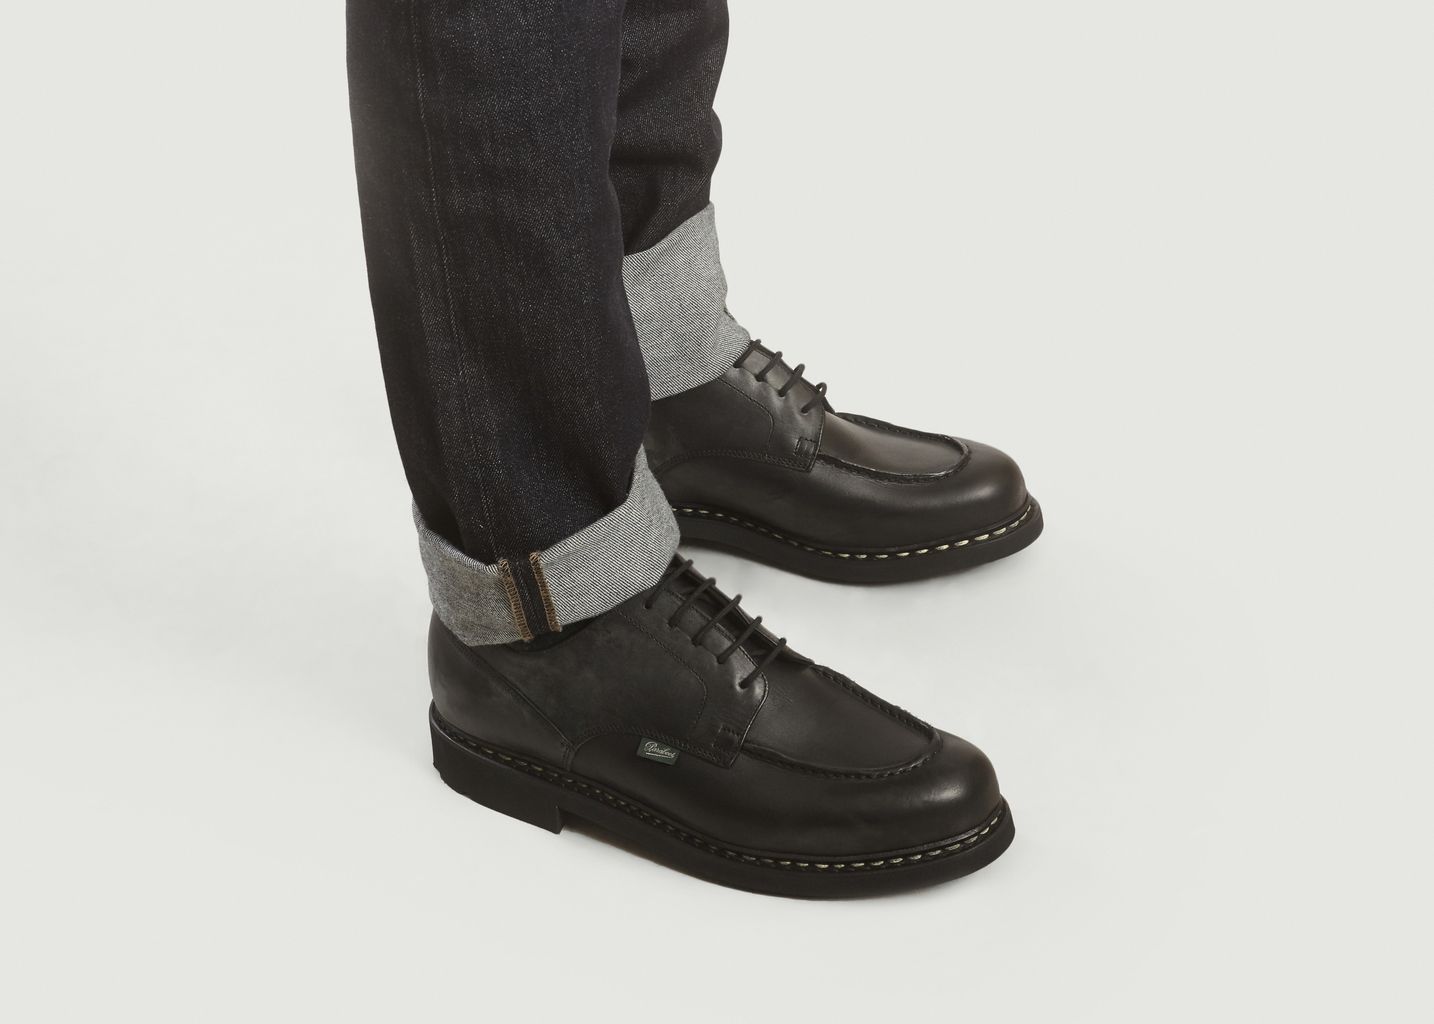 Paraboot Chambord On Feet | vlr.eng.br